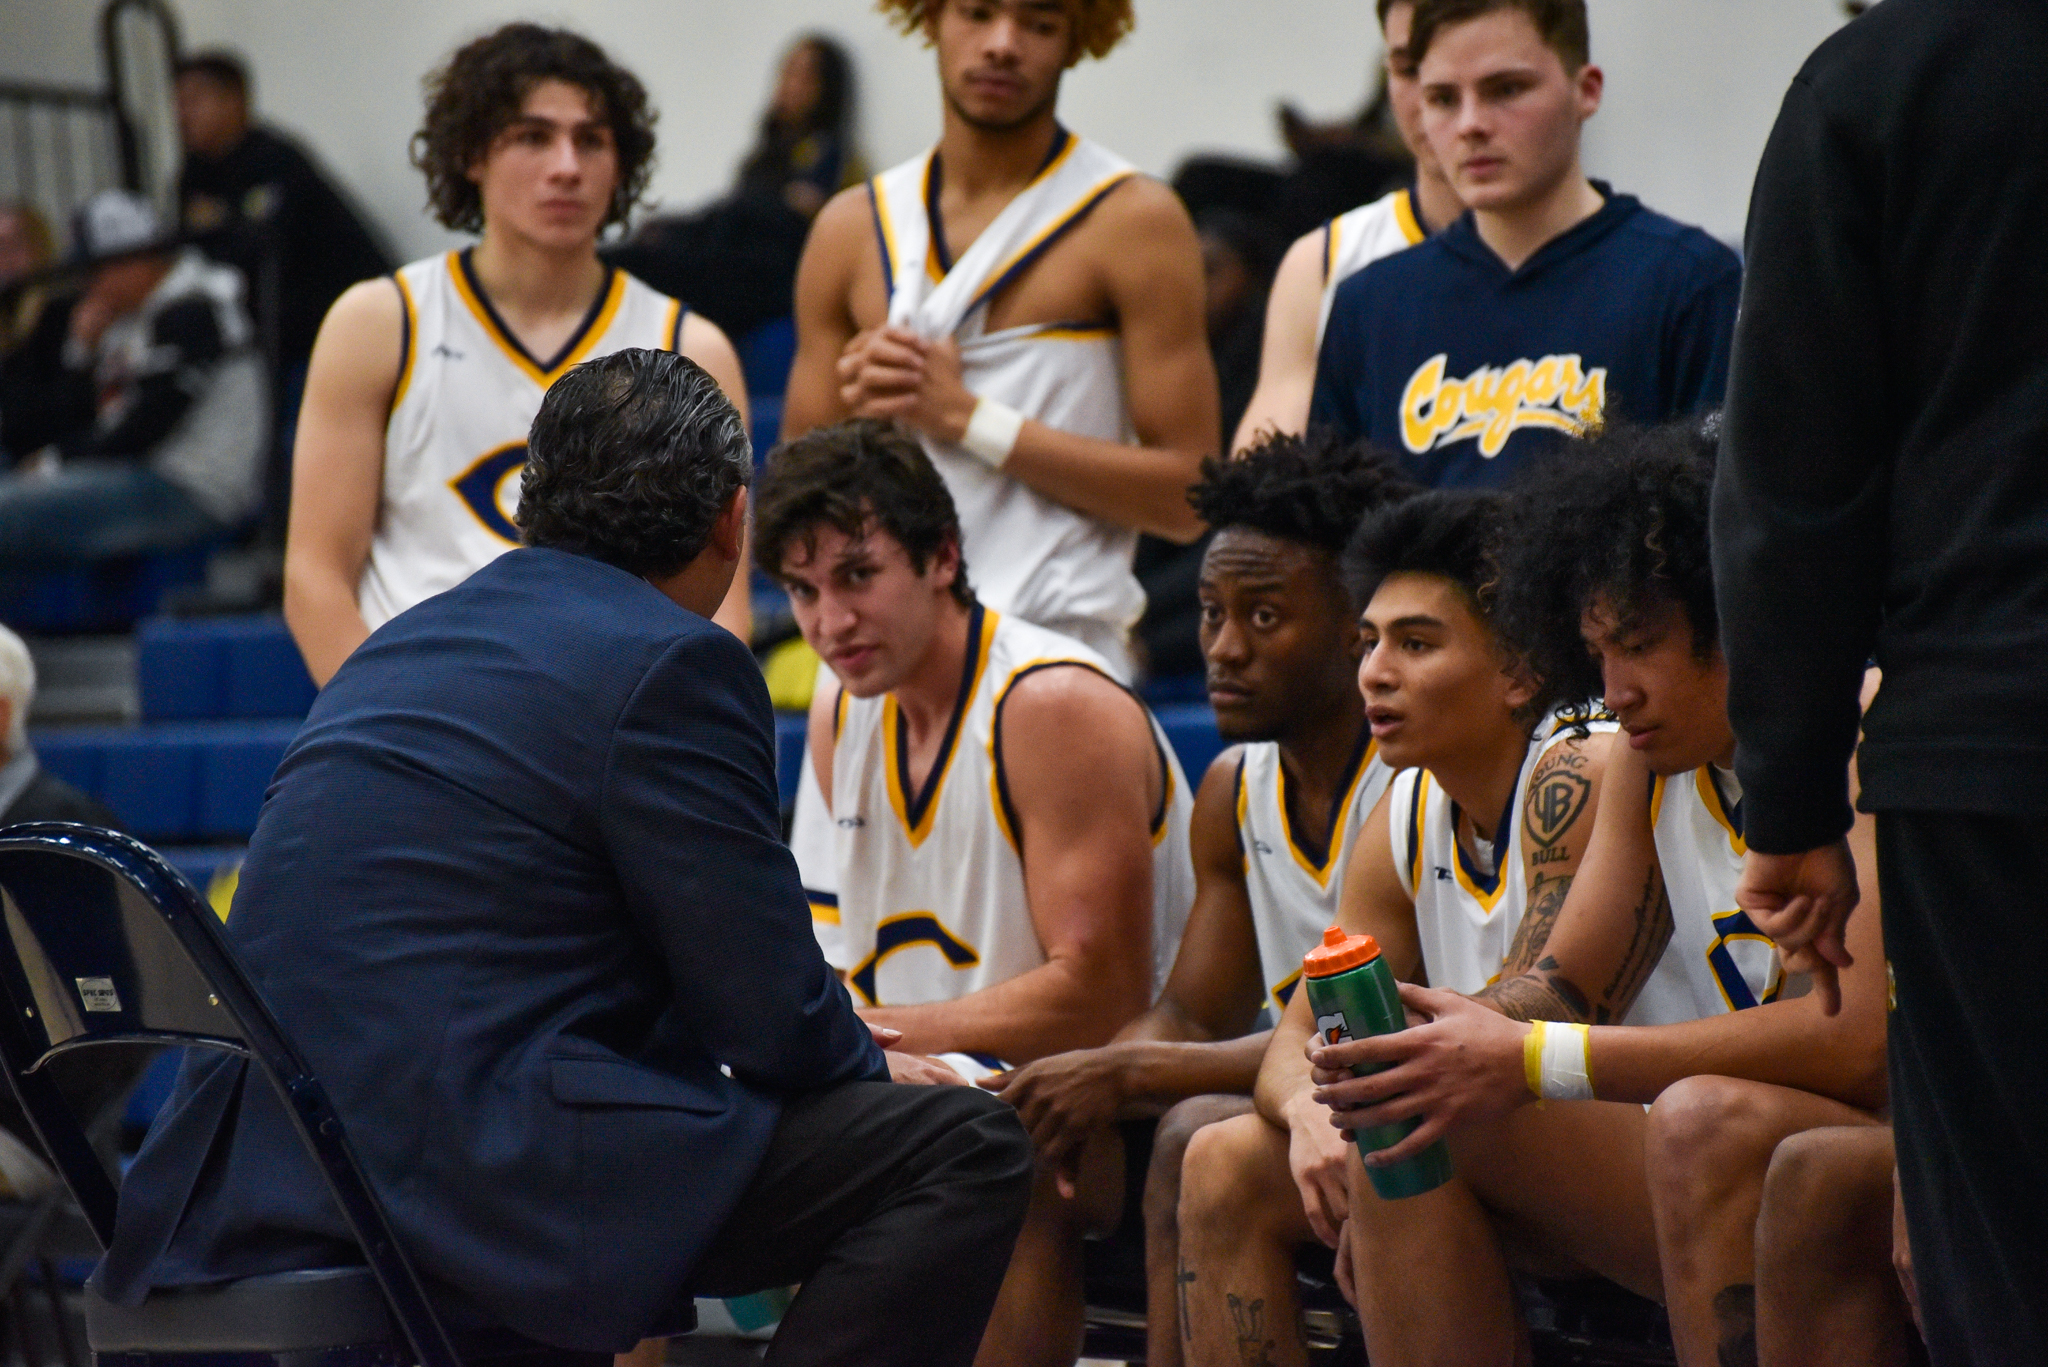 College of the Canyons men's basketball stock image.